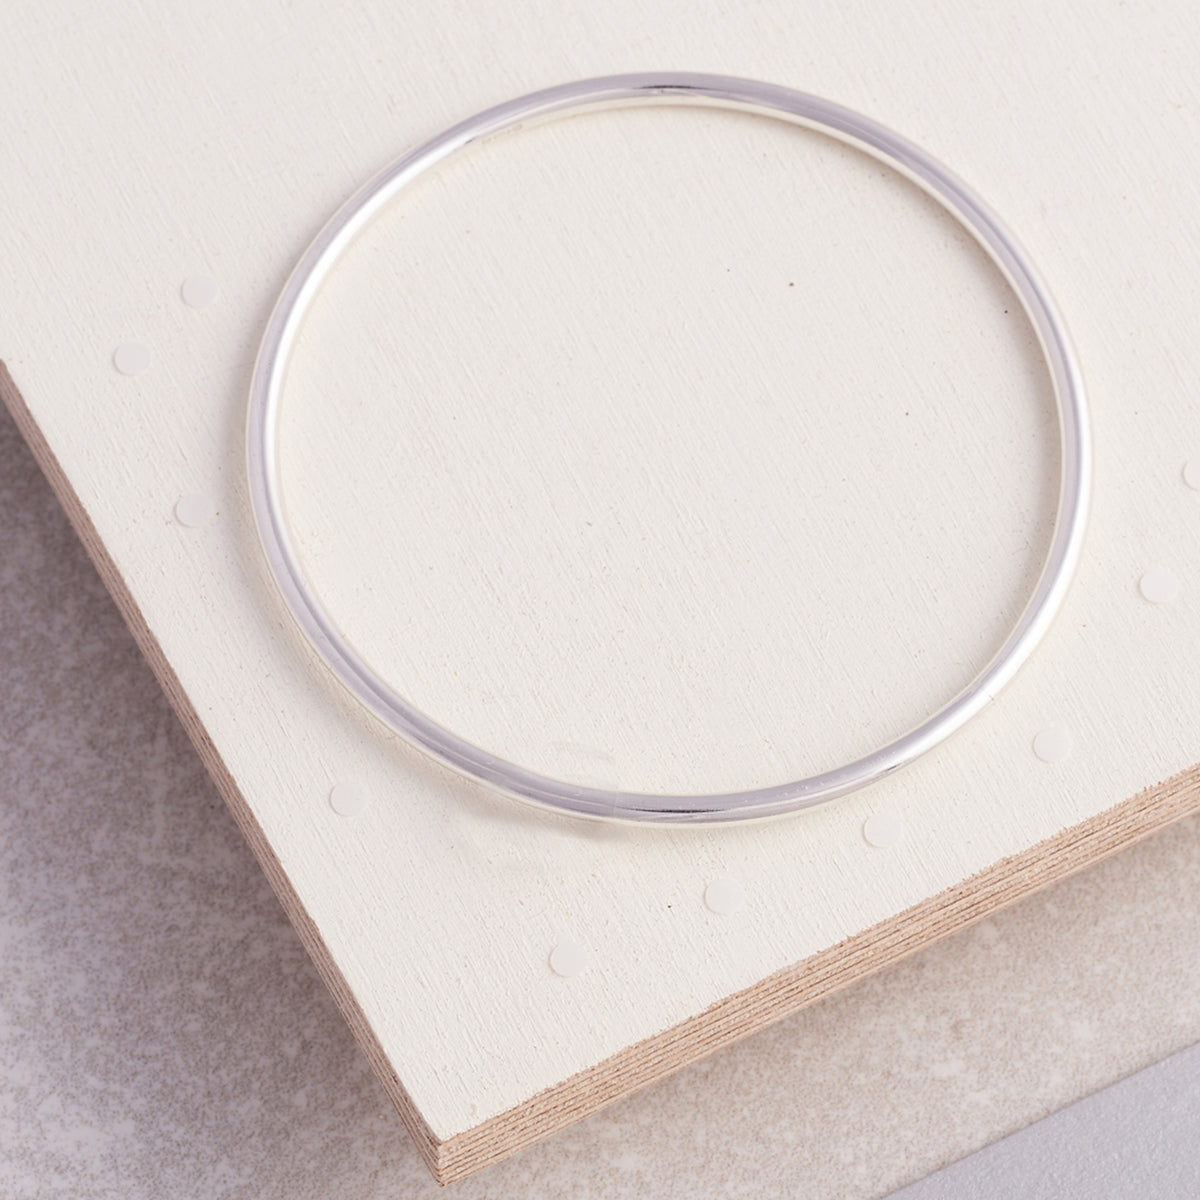 Recycled Solid Silver Bangle - 3mm Round Wire